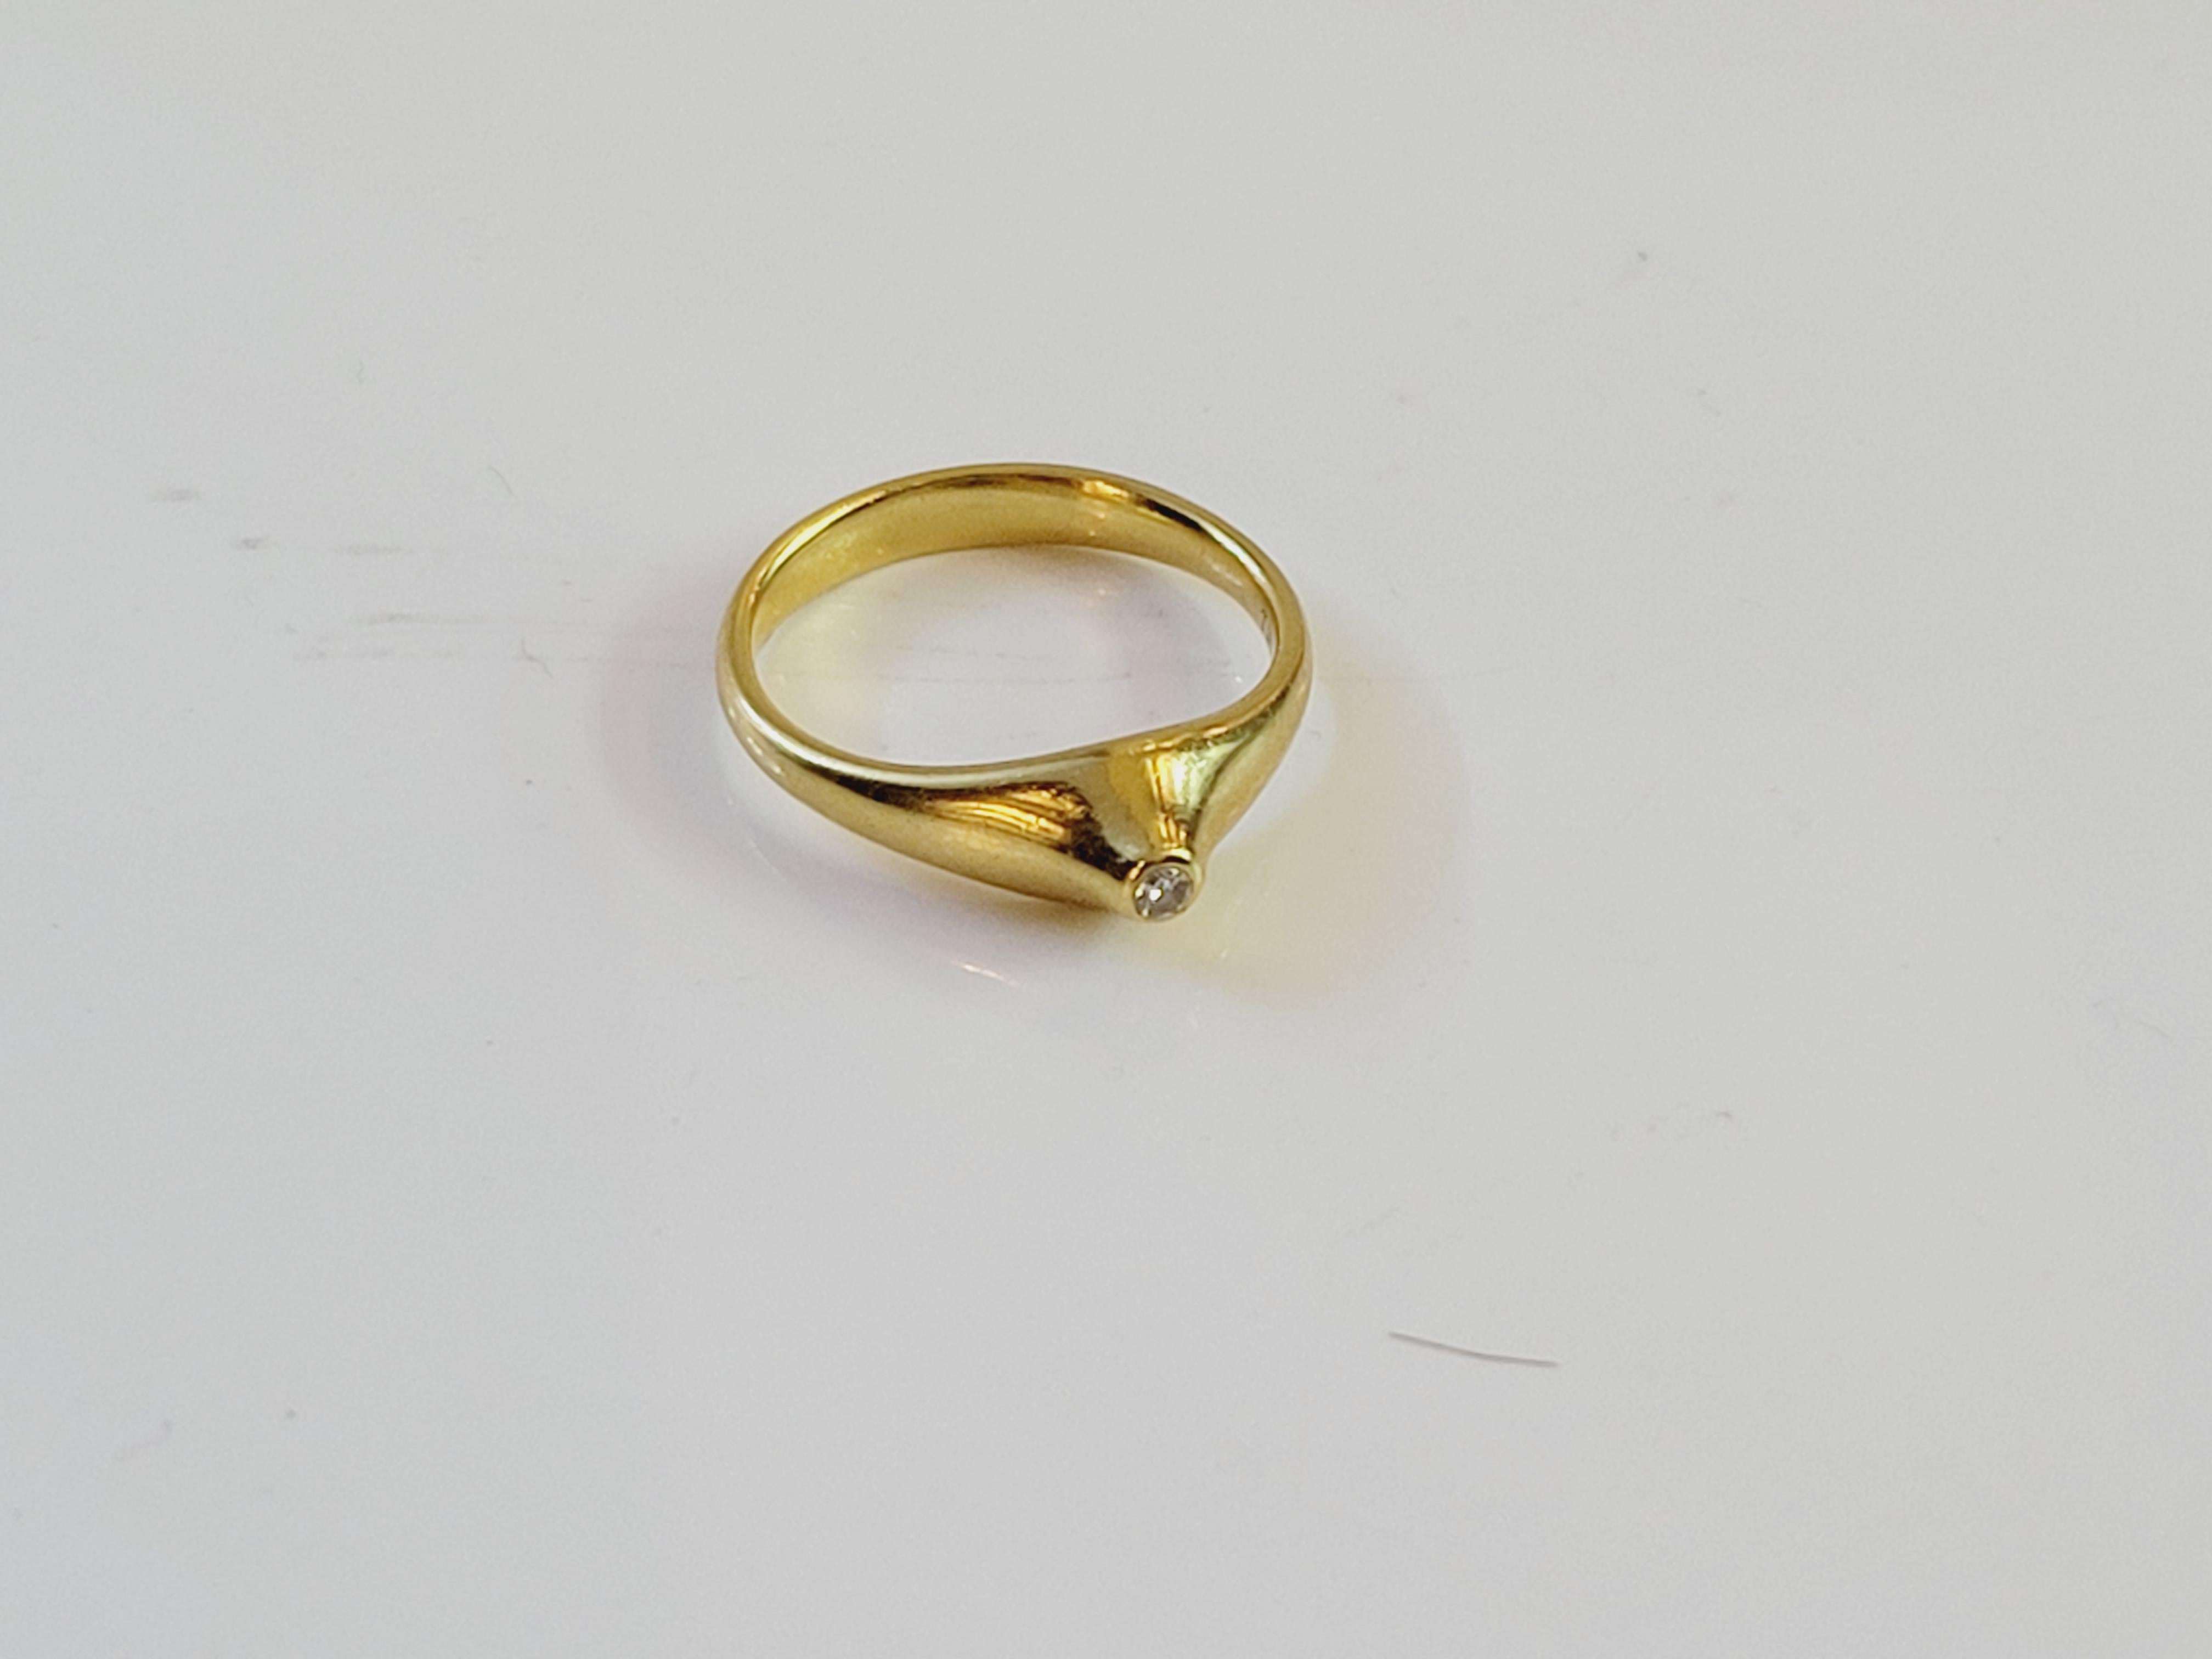 Brand Peretti  Tiffany & co   
18K Yellow gold
Mint condition
Ring Size 5
Ring width 3.0mm
Ring weight 3.9gr
Comes with Tiffany & co  ring box